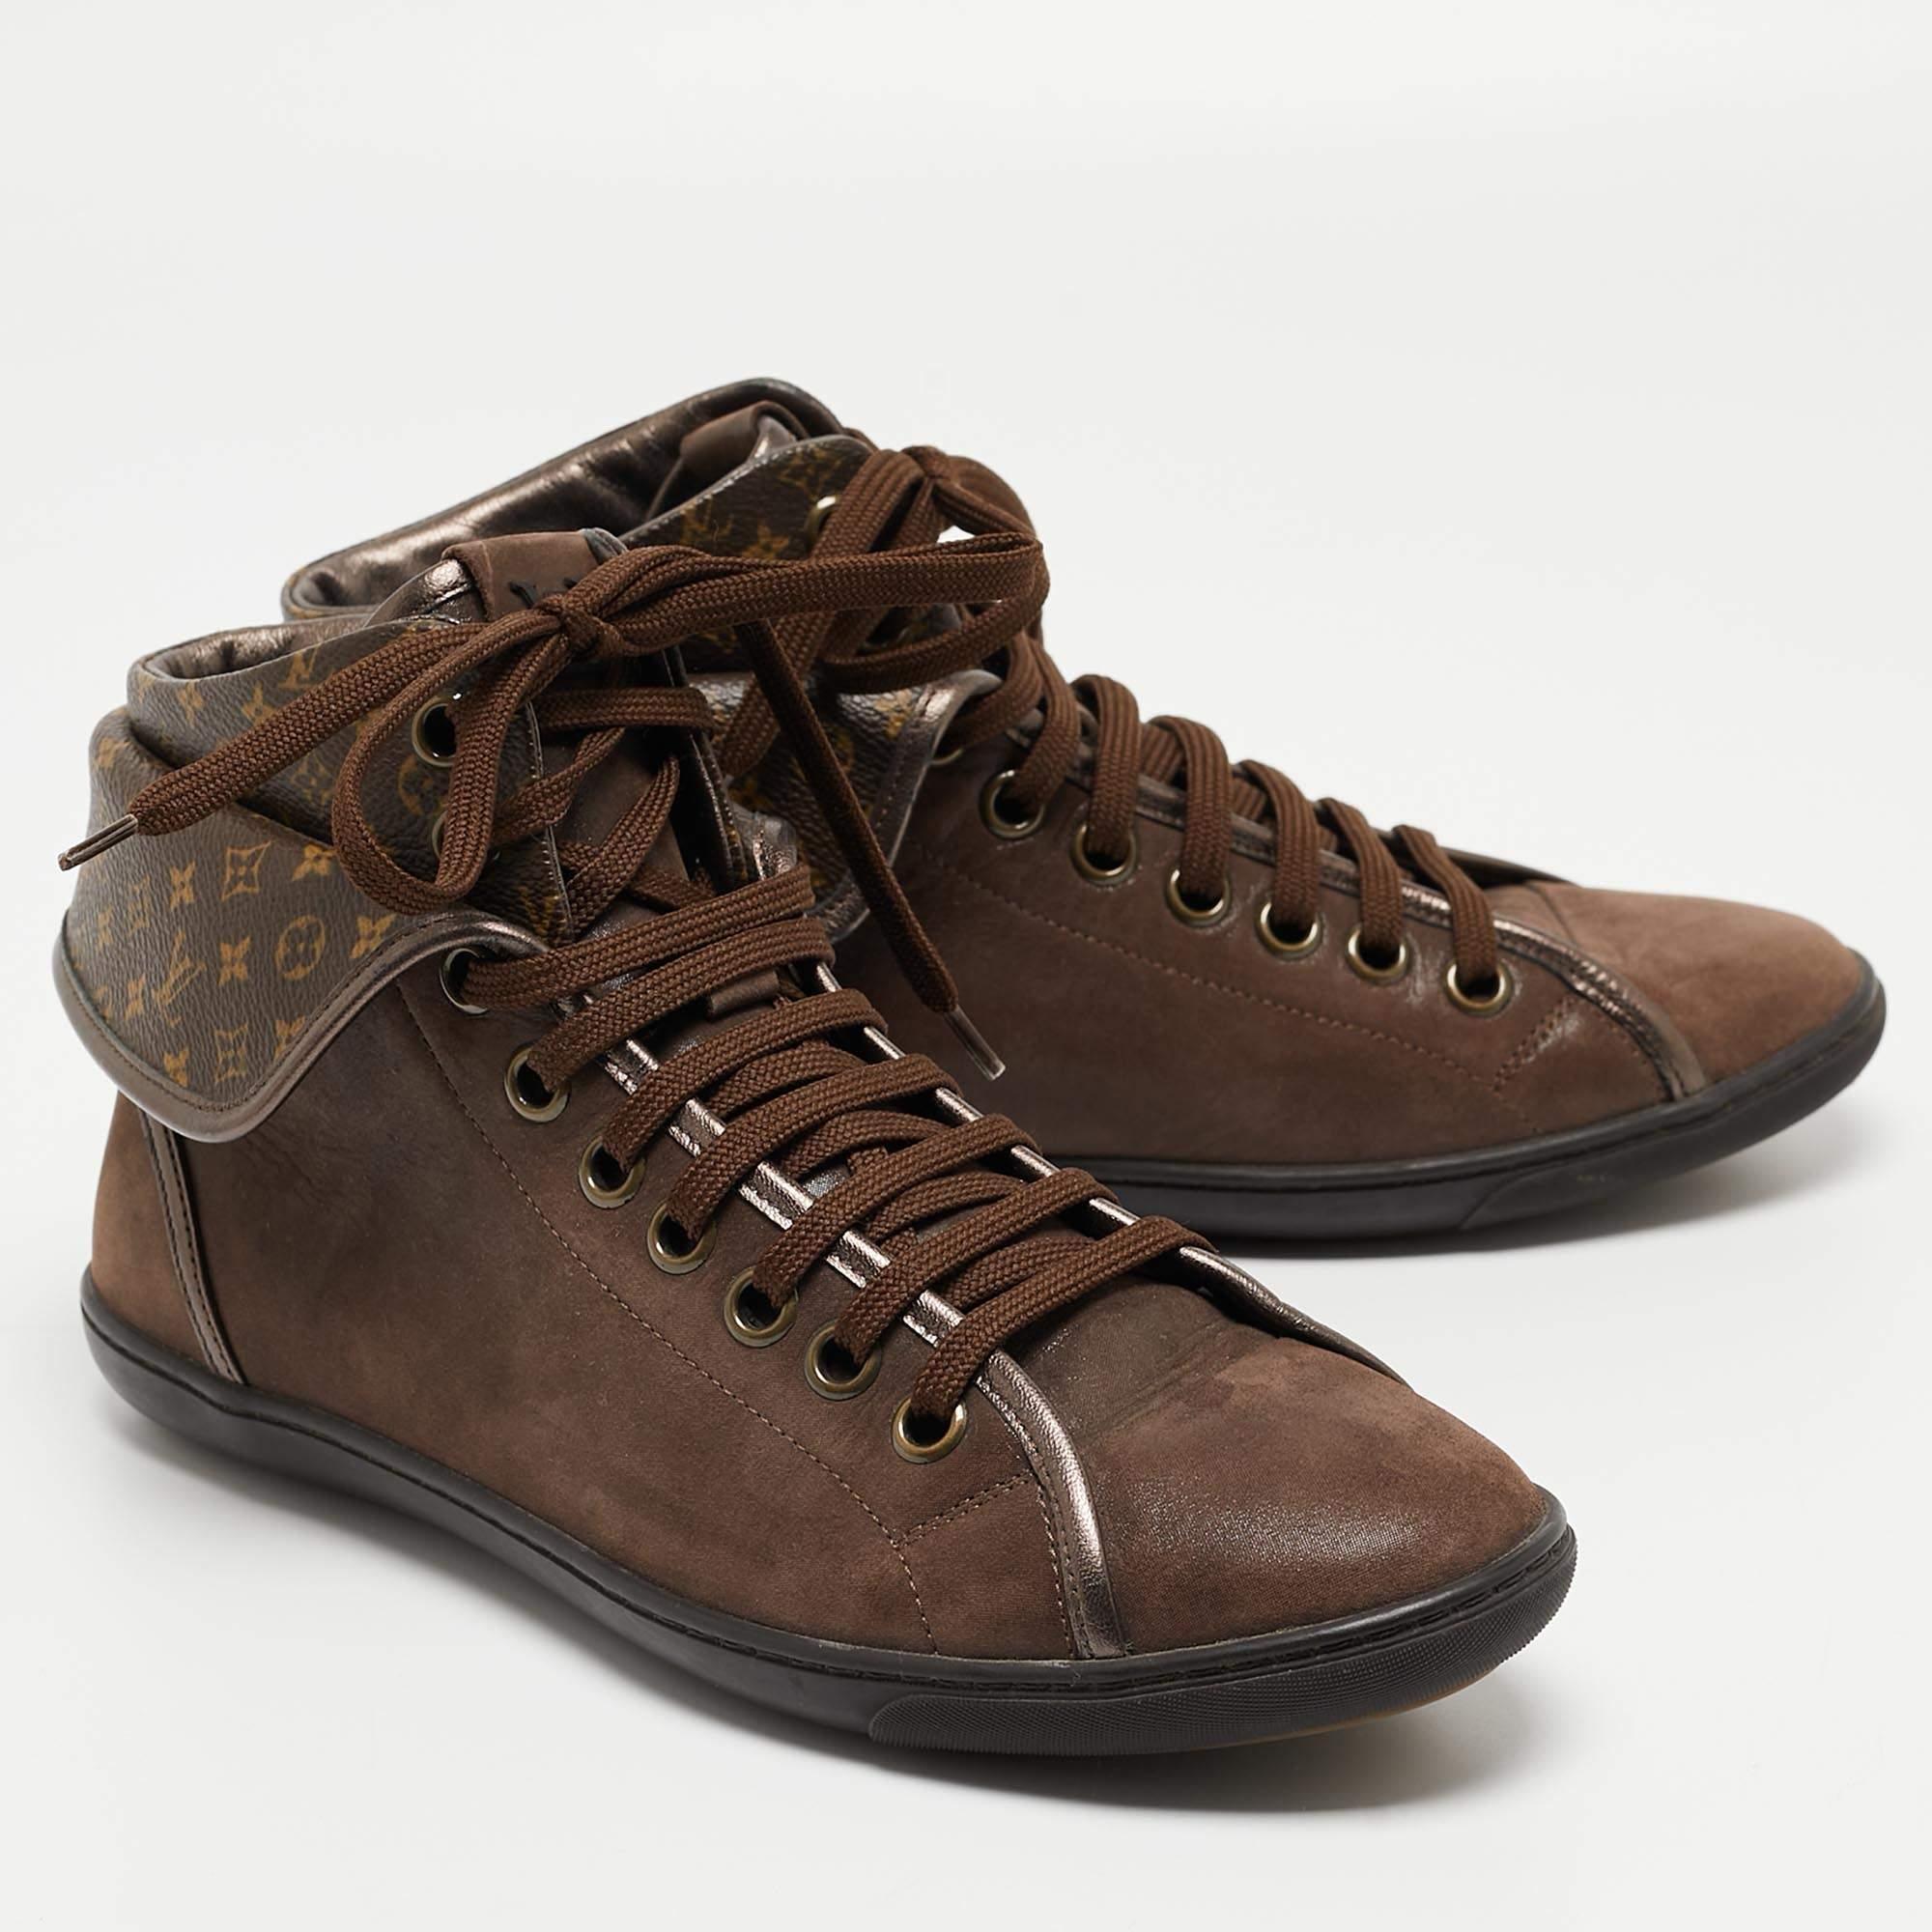 Louis Vuitton Brown Monogram Canvas and Leather Brea Sneakers Size 38.5 For Sale 1